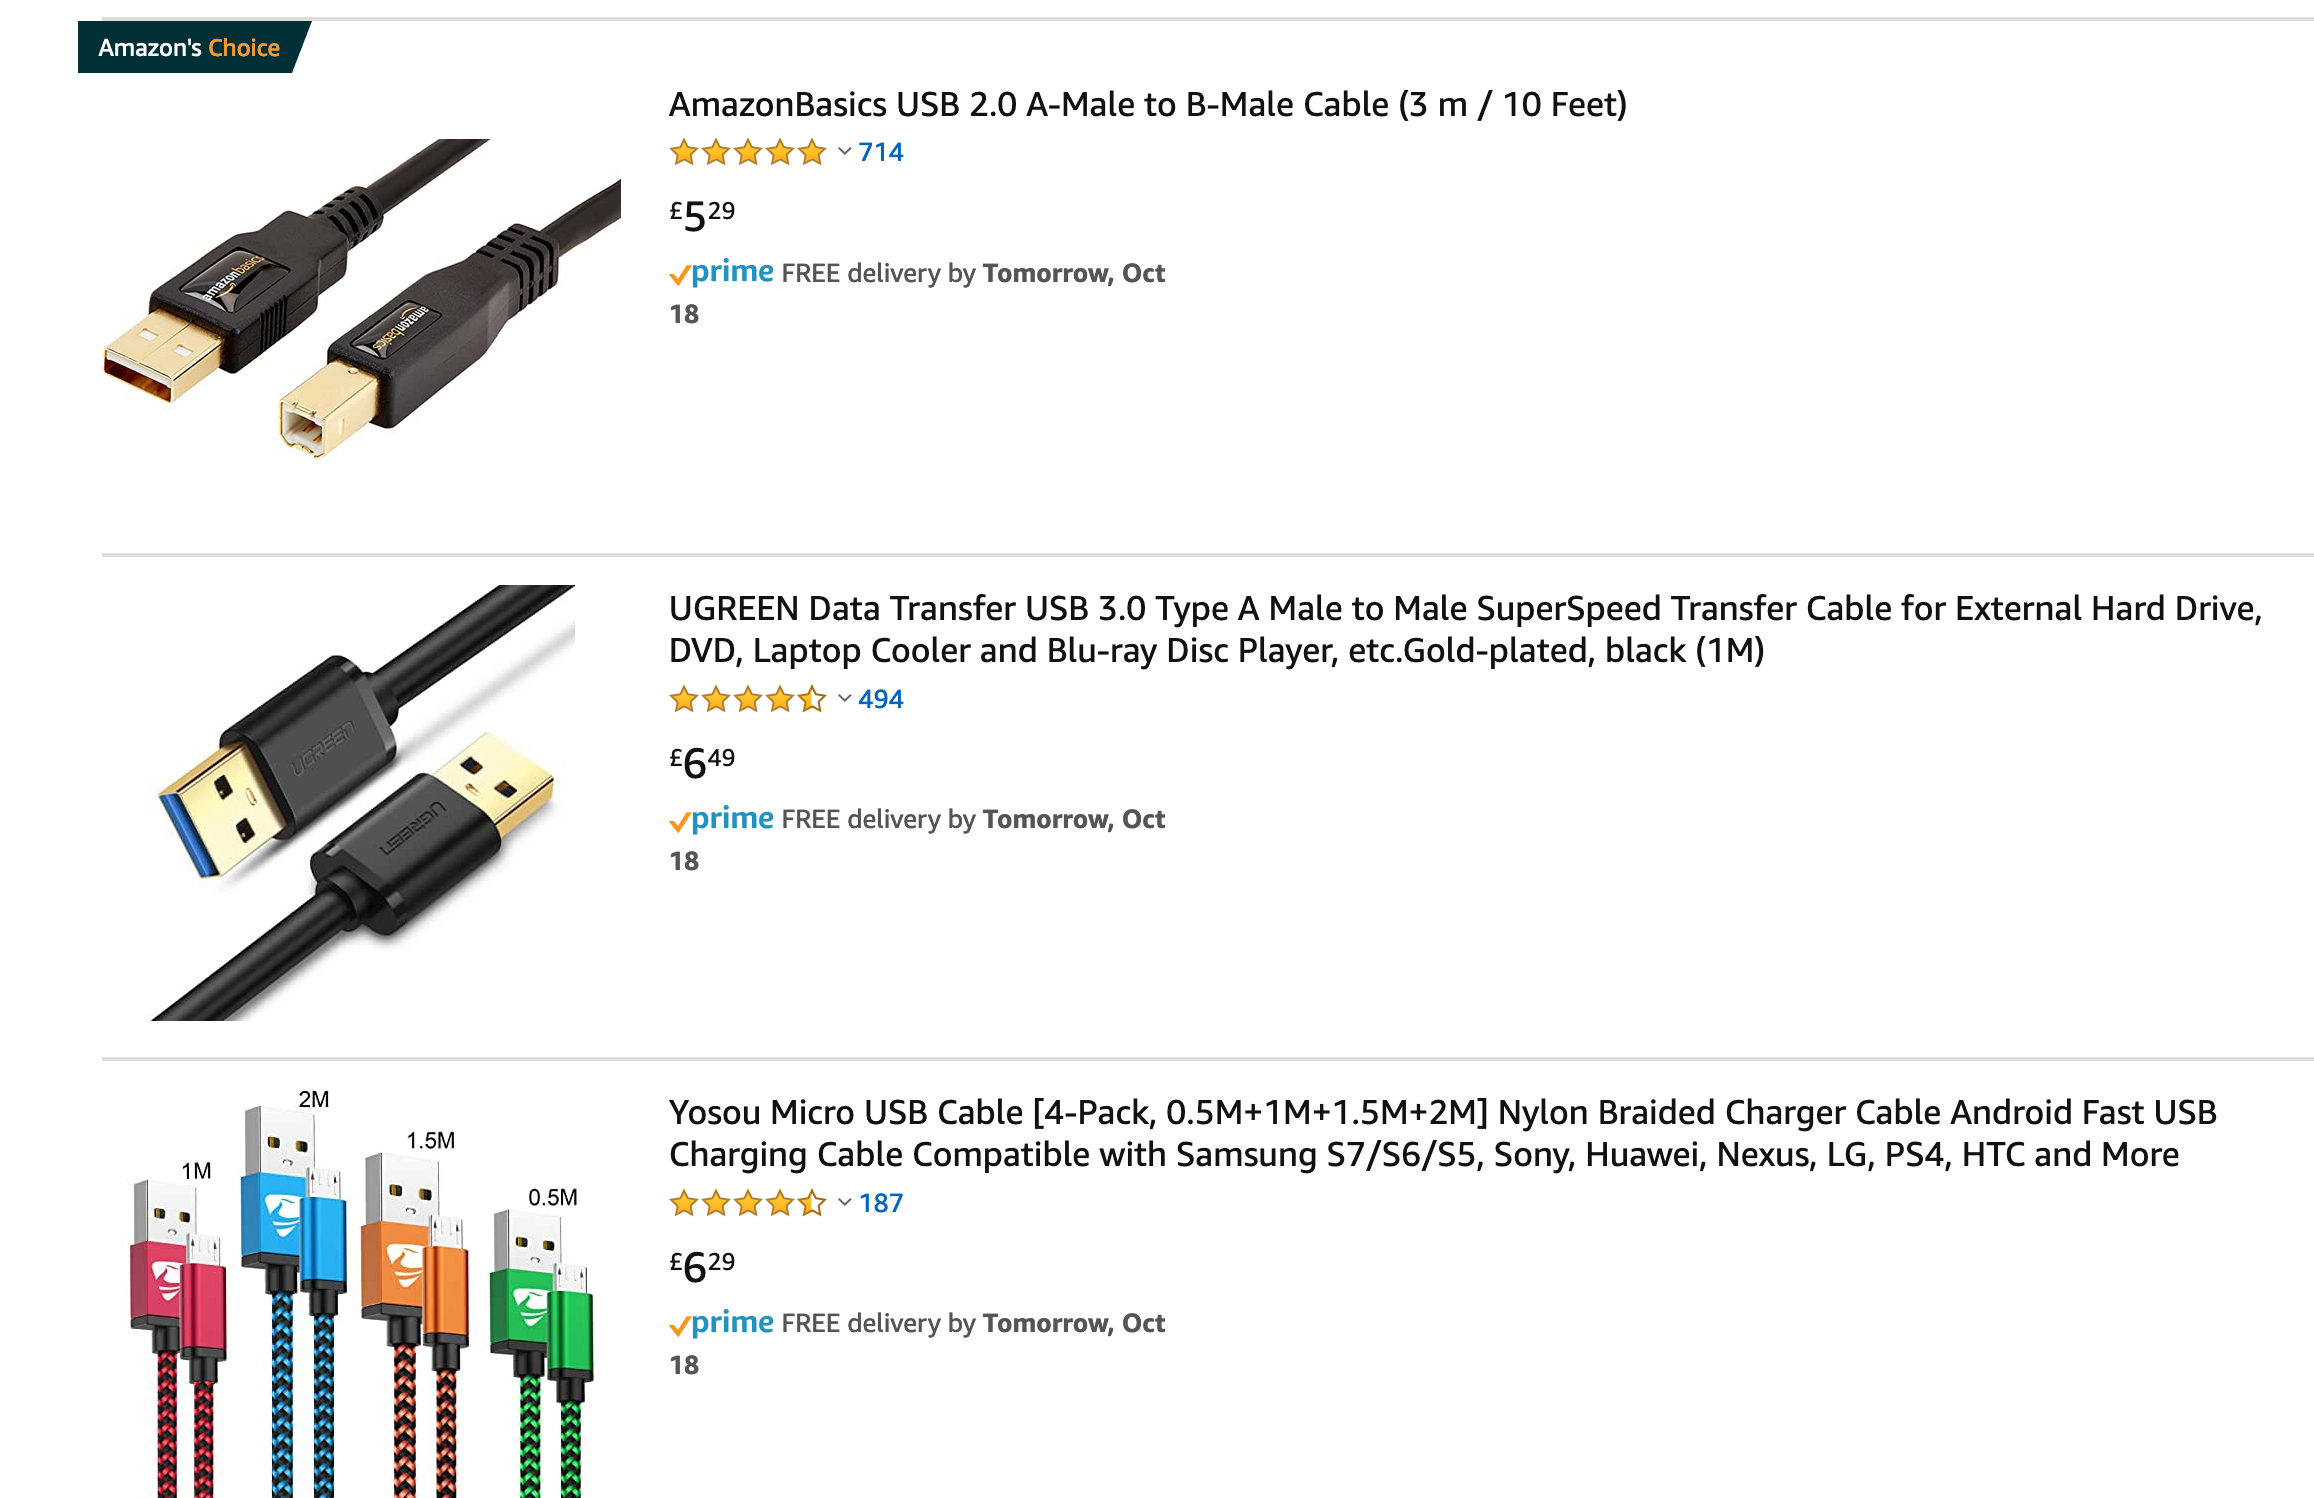 screenshot of products on Amazon, the Amazon Choice is the cheapest